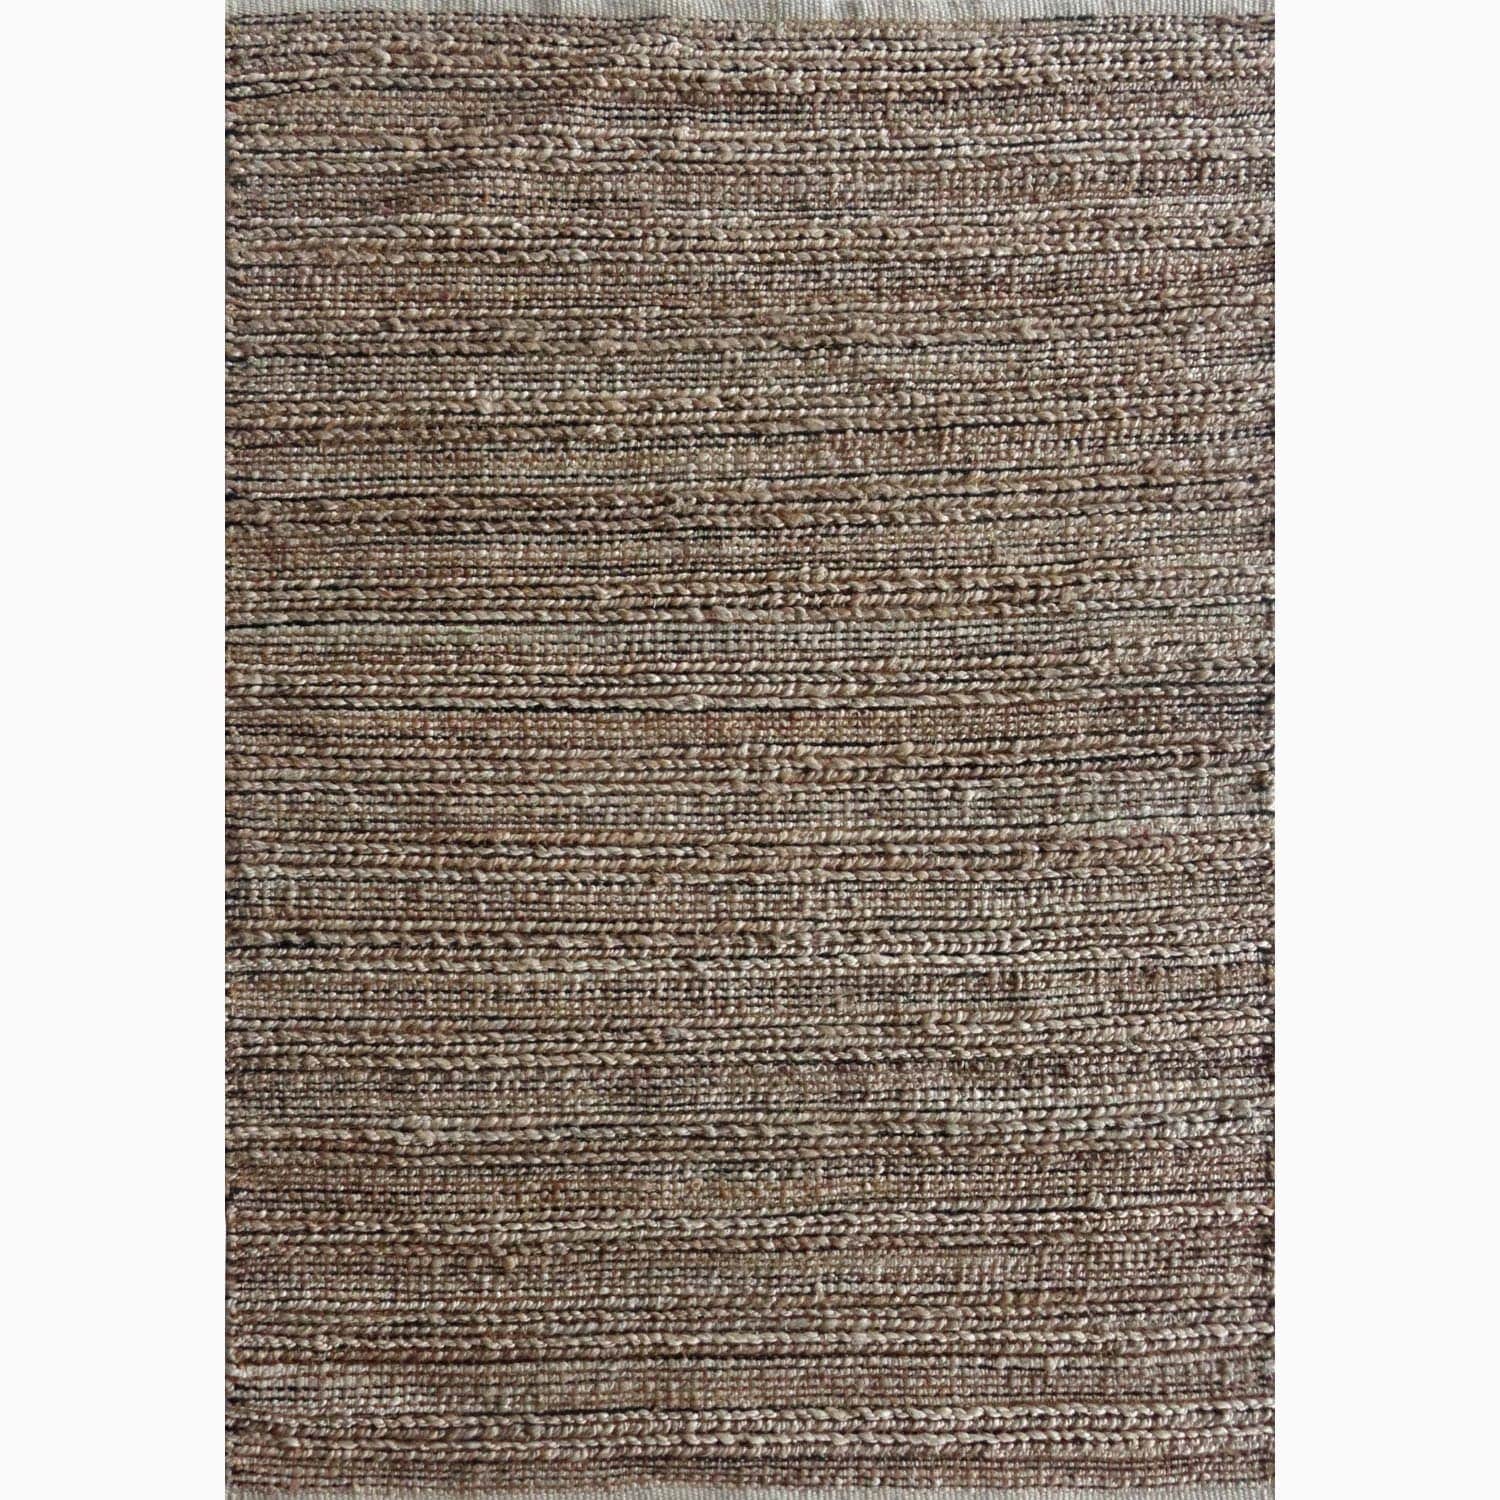 Handmade Solid Pattern Taupe/ Gray Cotton/ Jute Area Rug (36 X 56)